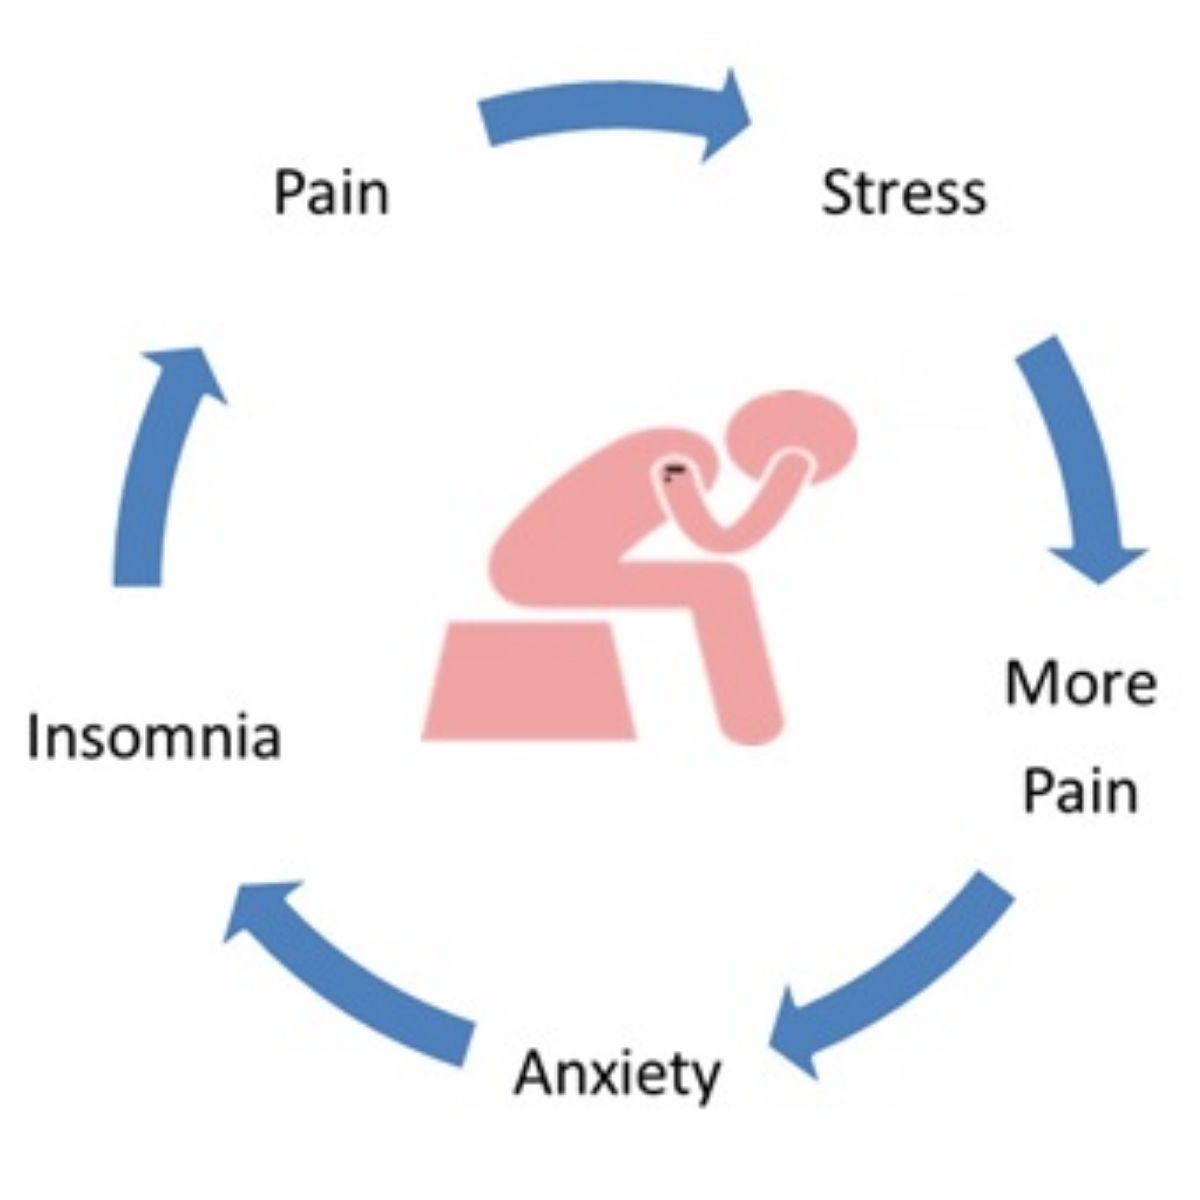 Pain _ Stress _ Anxiety _Insomnia = all linked